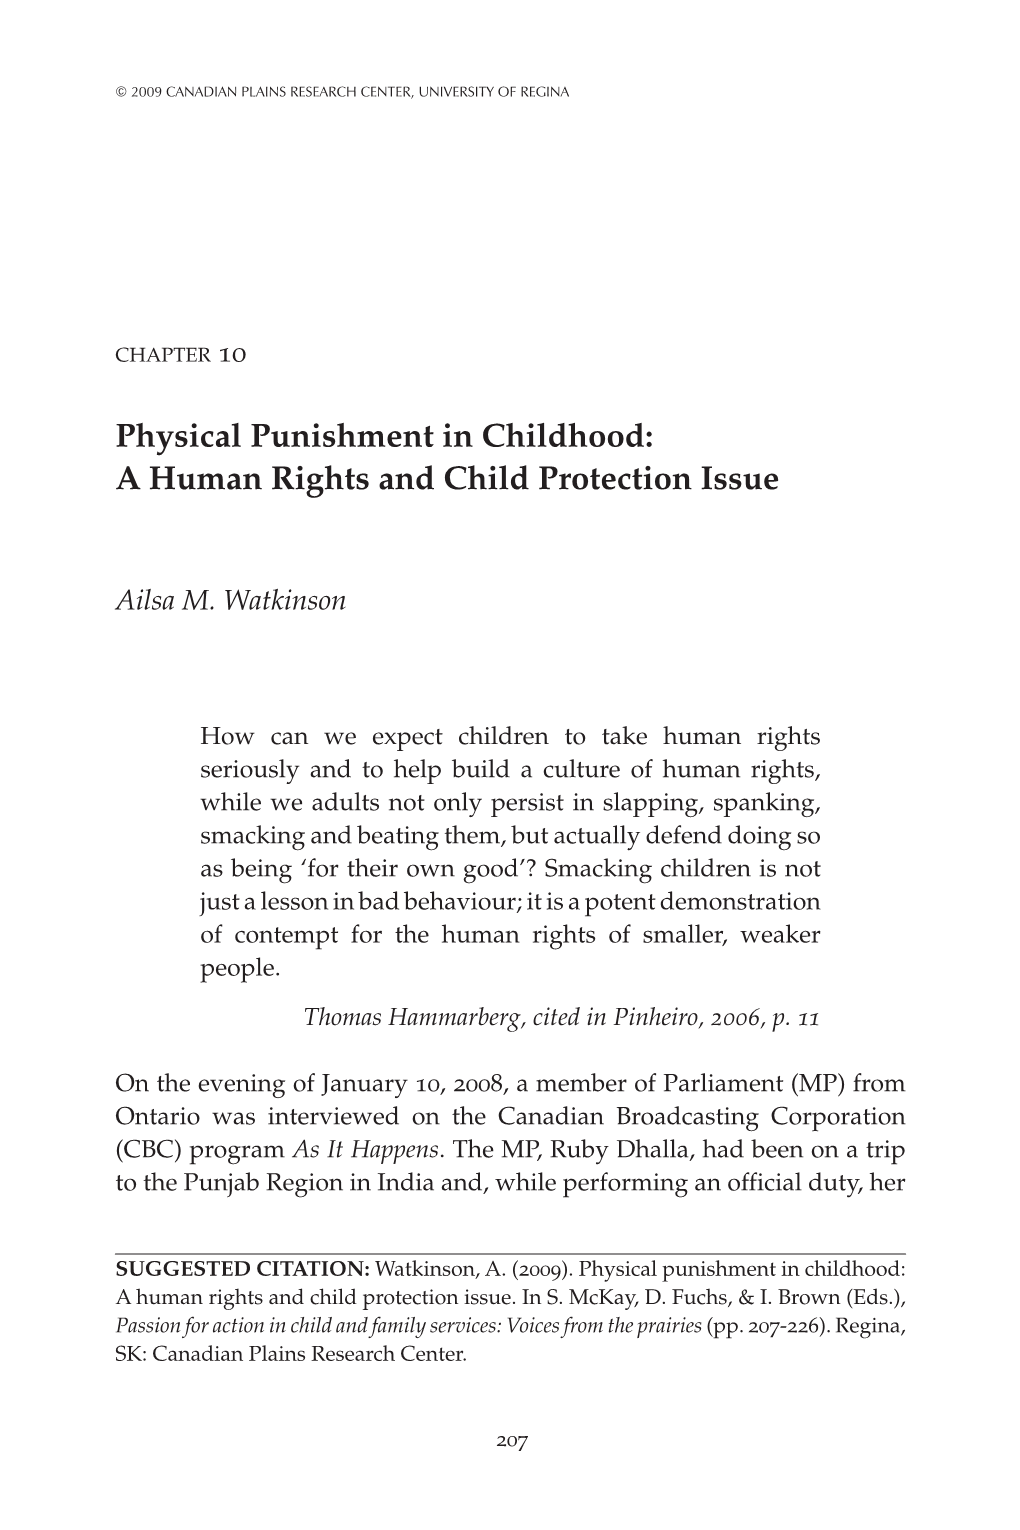 Physical Punishment in Childhood: a Human Rights and Child Protection Issue